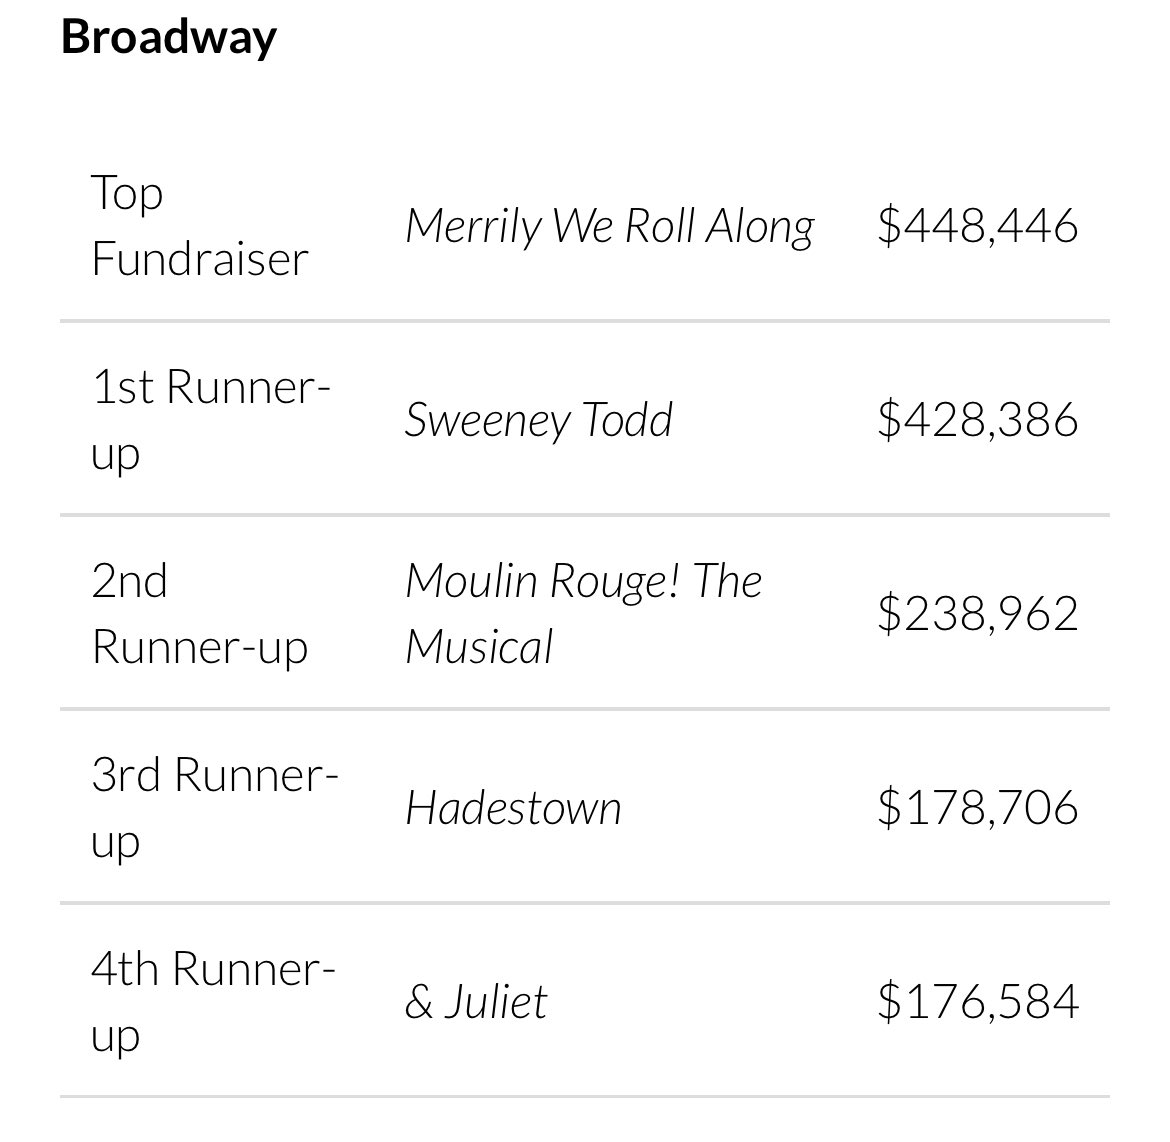 top 4 musicals that had the most bcefa donations !!! let’s goooo💝